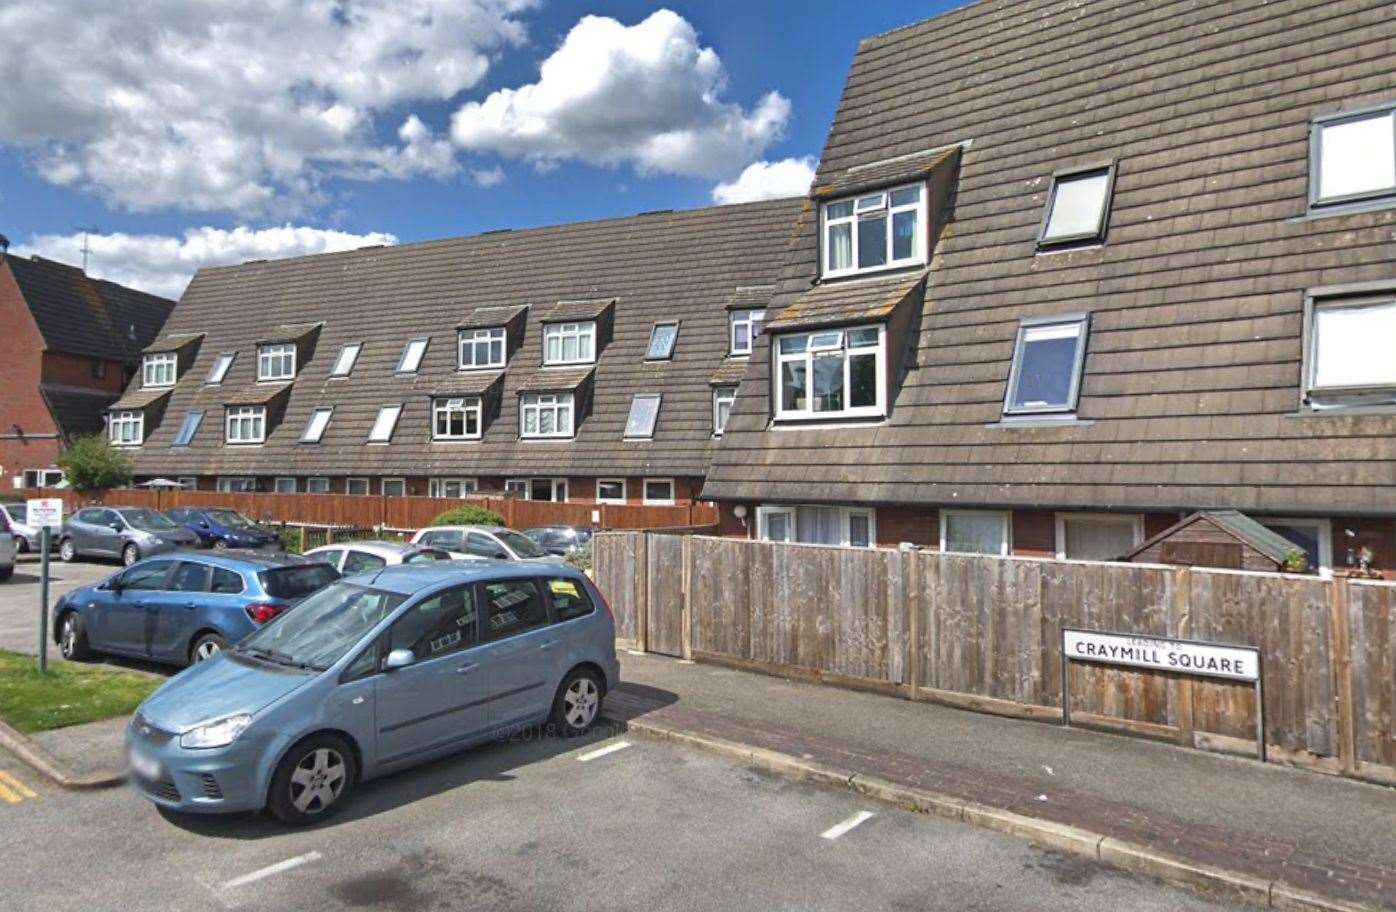 Five lucky residents in Craymill Square, Crayford, have won a share of £1 million. Picture: Google